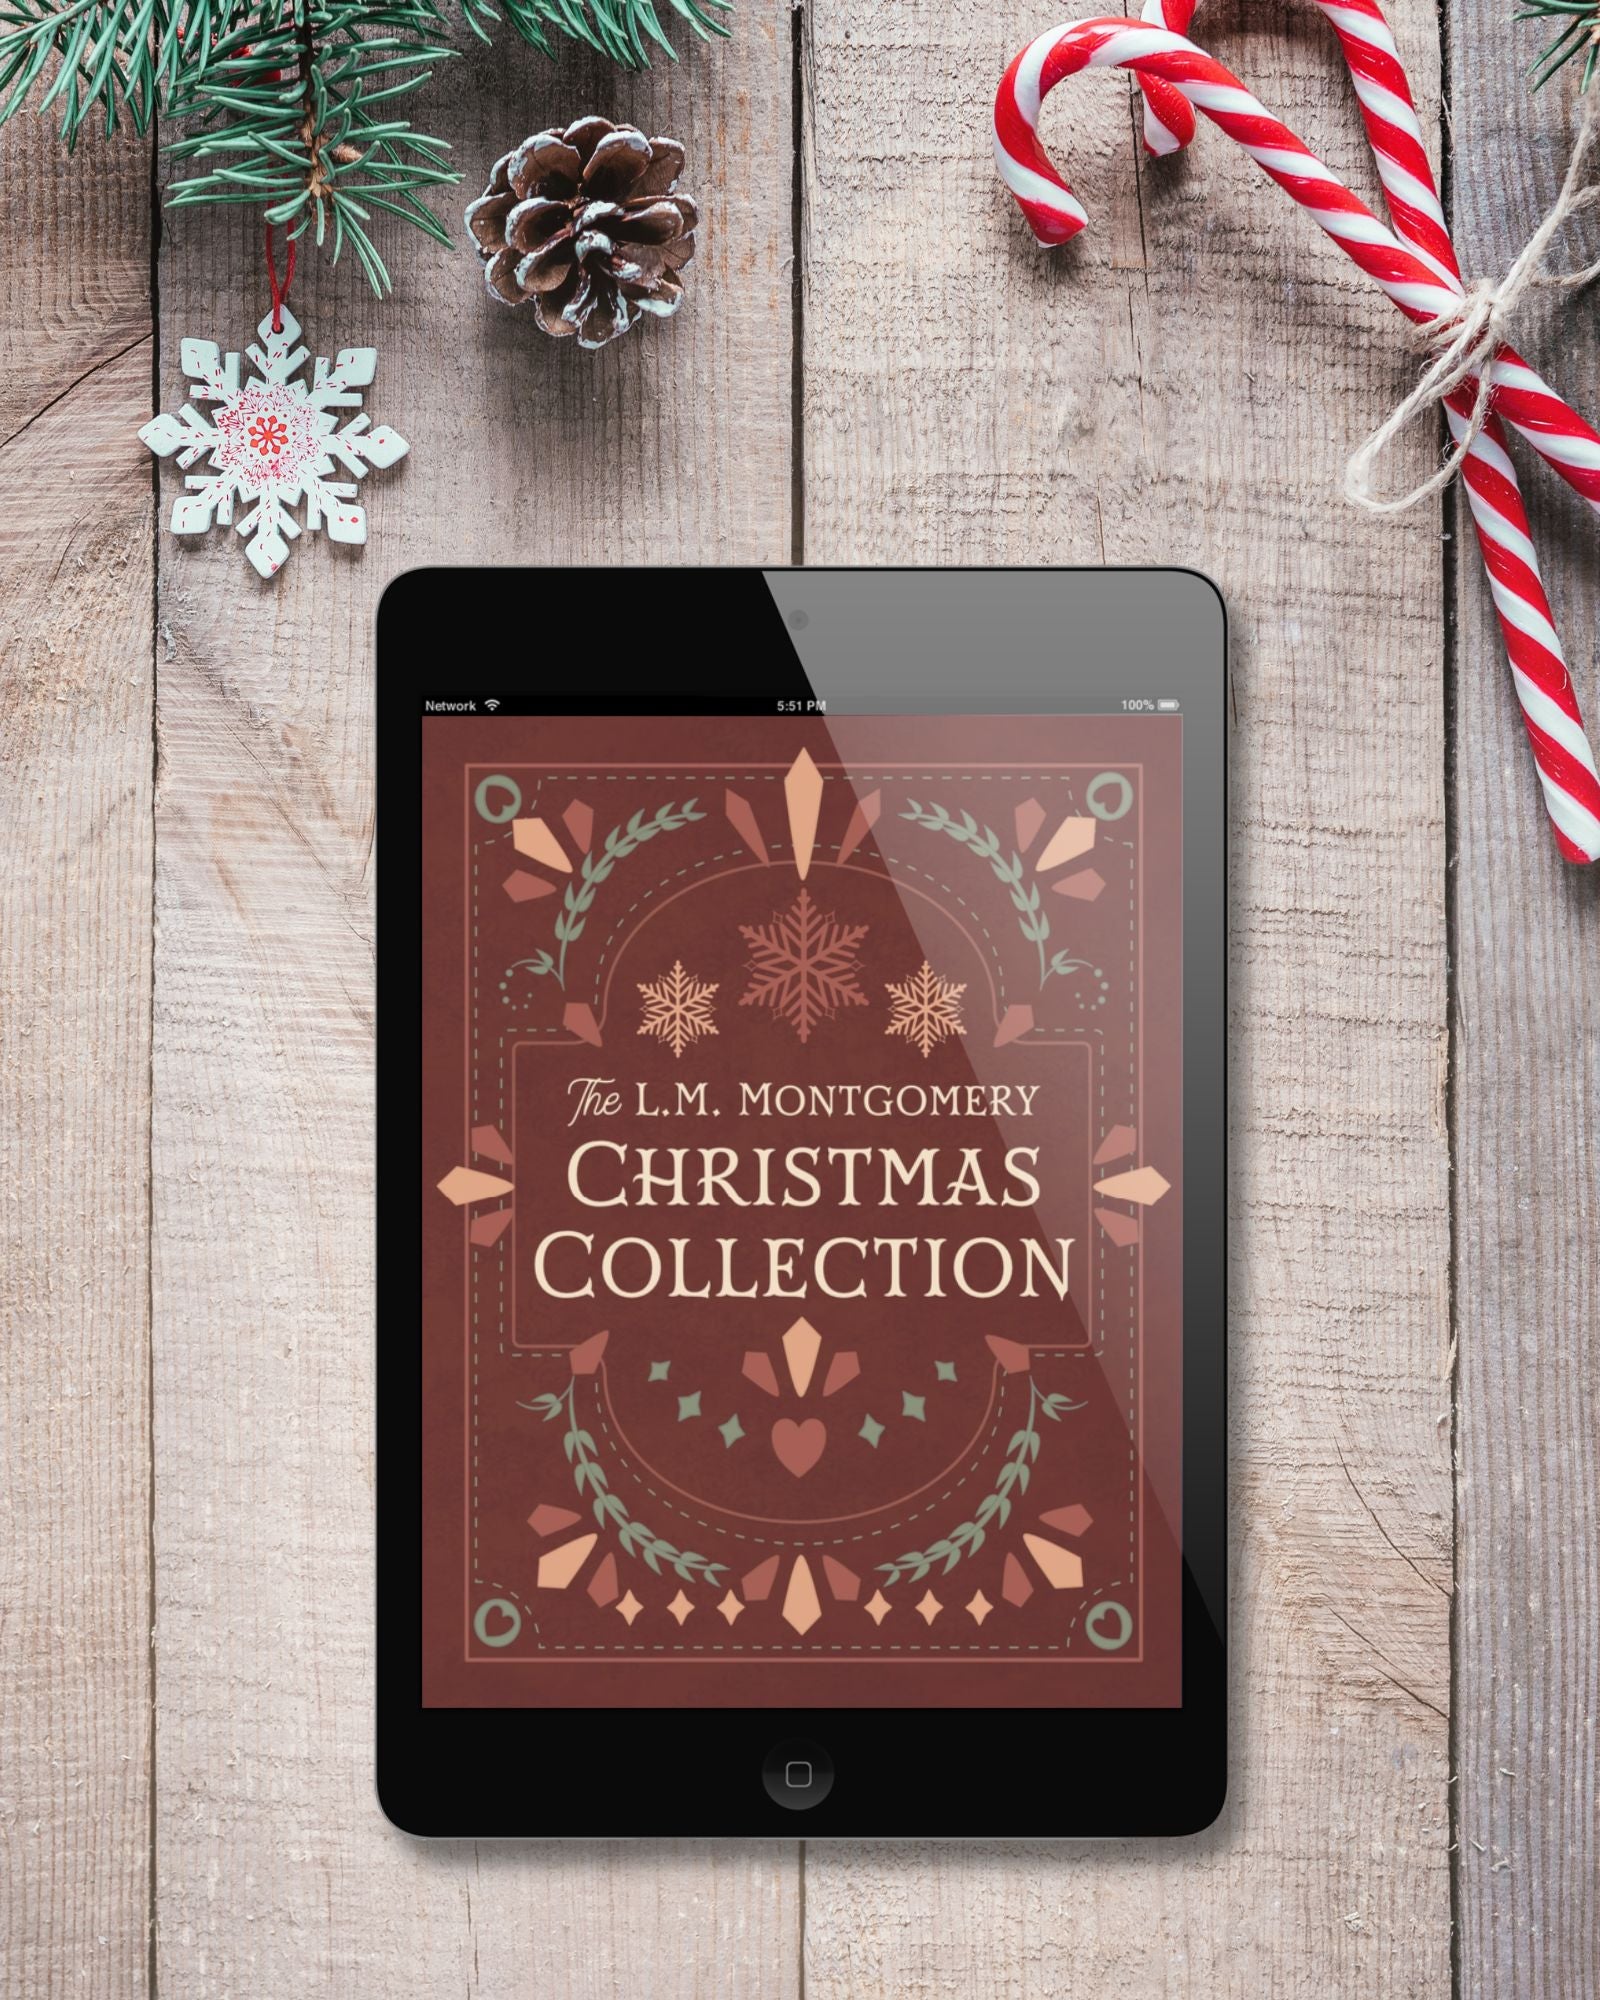 Ebook from the author of Anne of Green Gables, "L.M. Montgomery's Christmas Collection," made up of holiday-themed short stories, poems, and illustrations, published by Smidgen Press